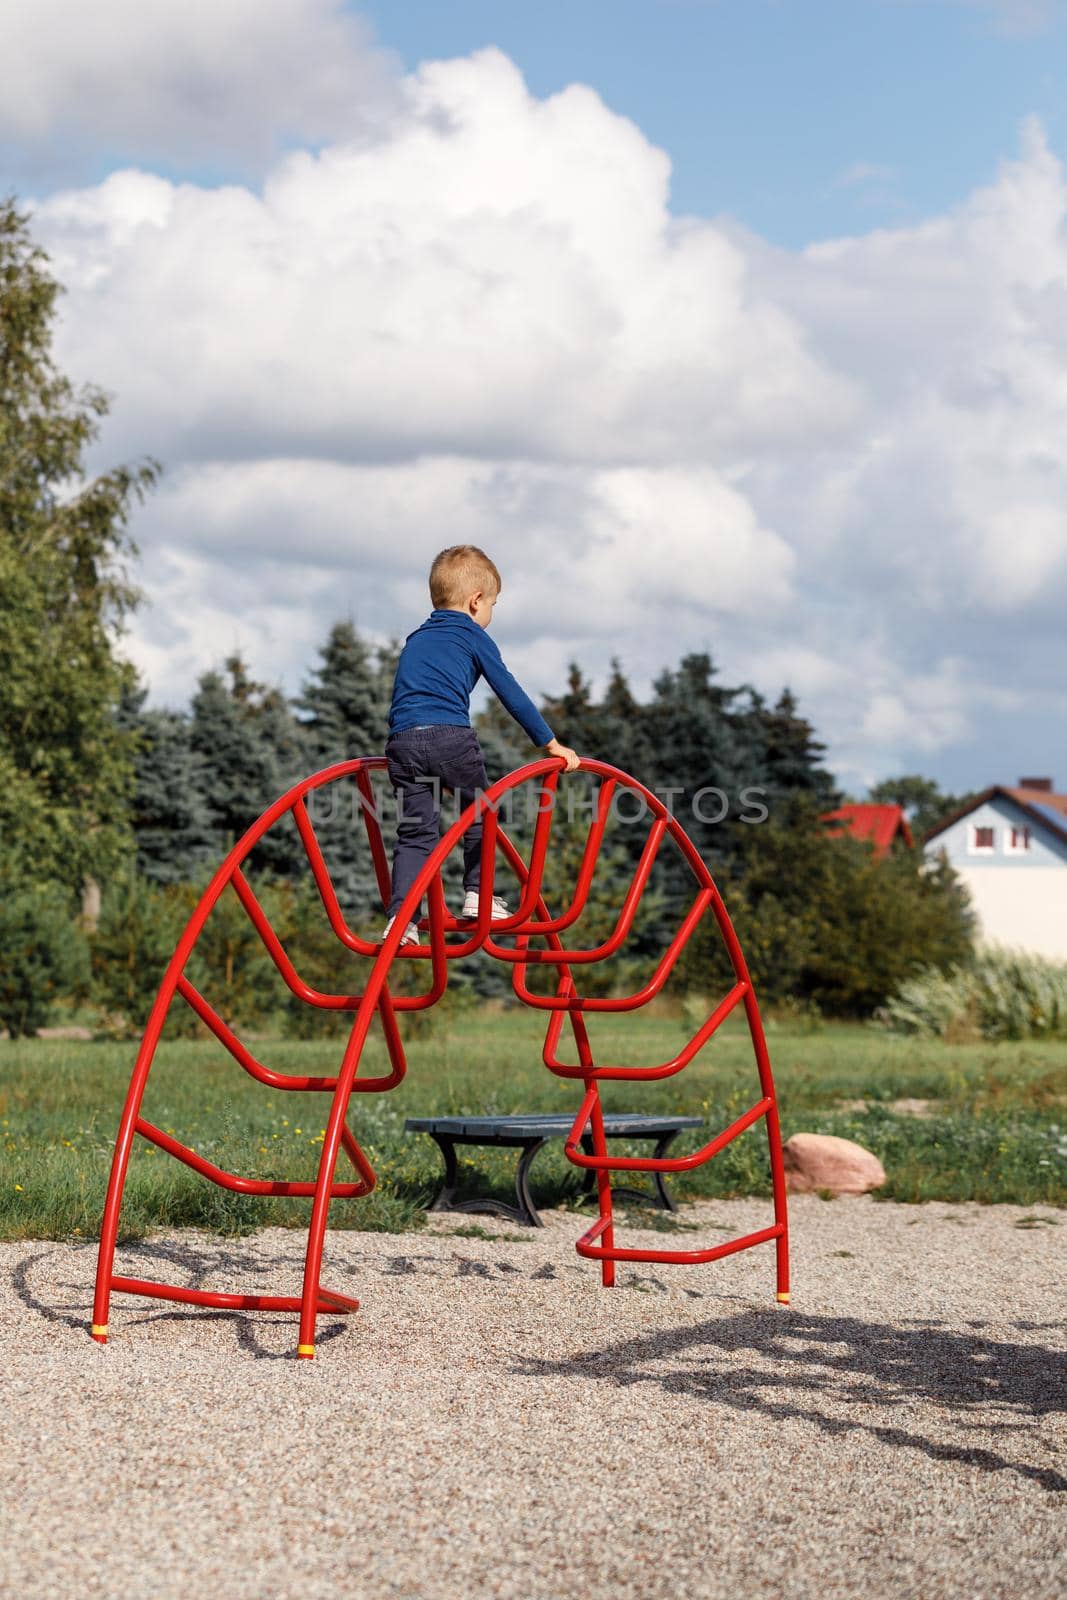 A little very brave boy climbs a metal, big red arched ladder on the playground. The concept of parental care and safety in children's play.